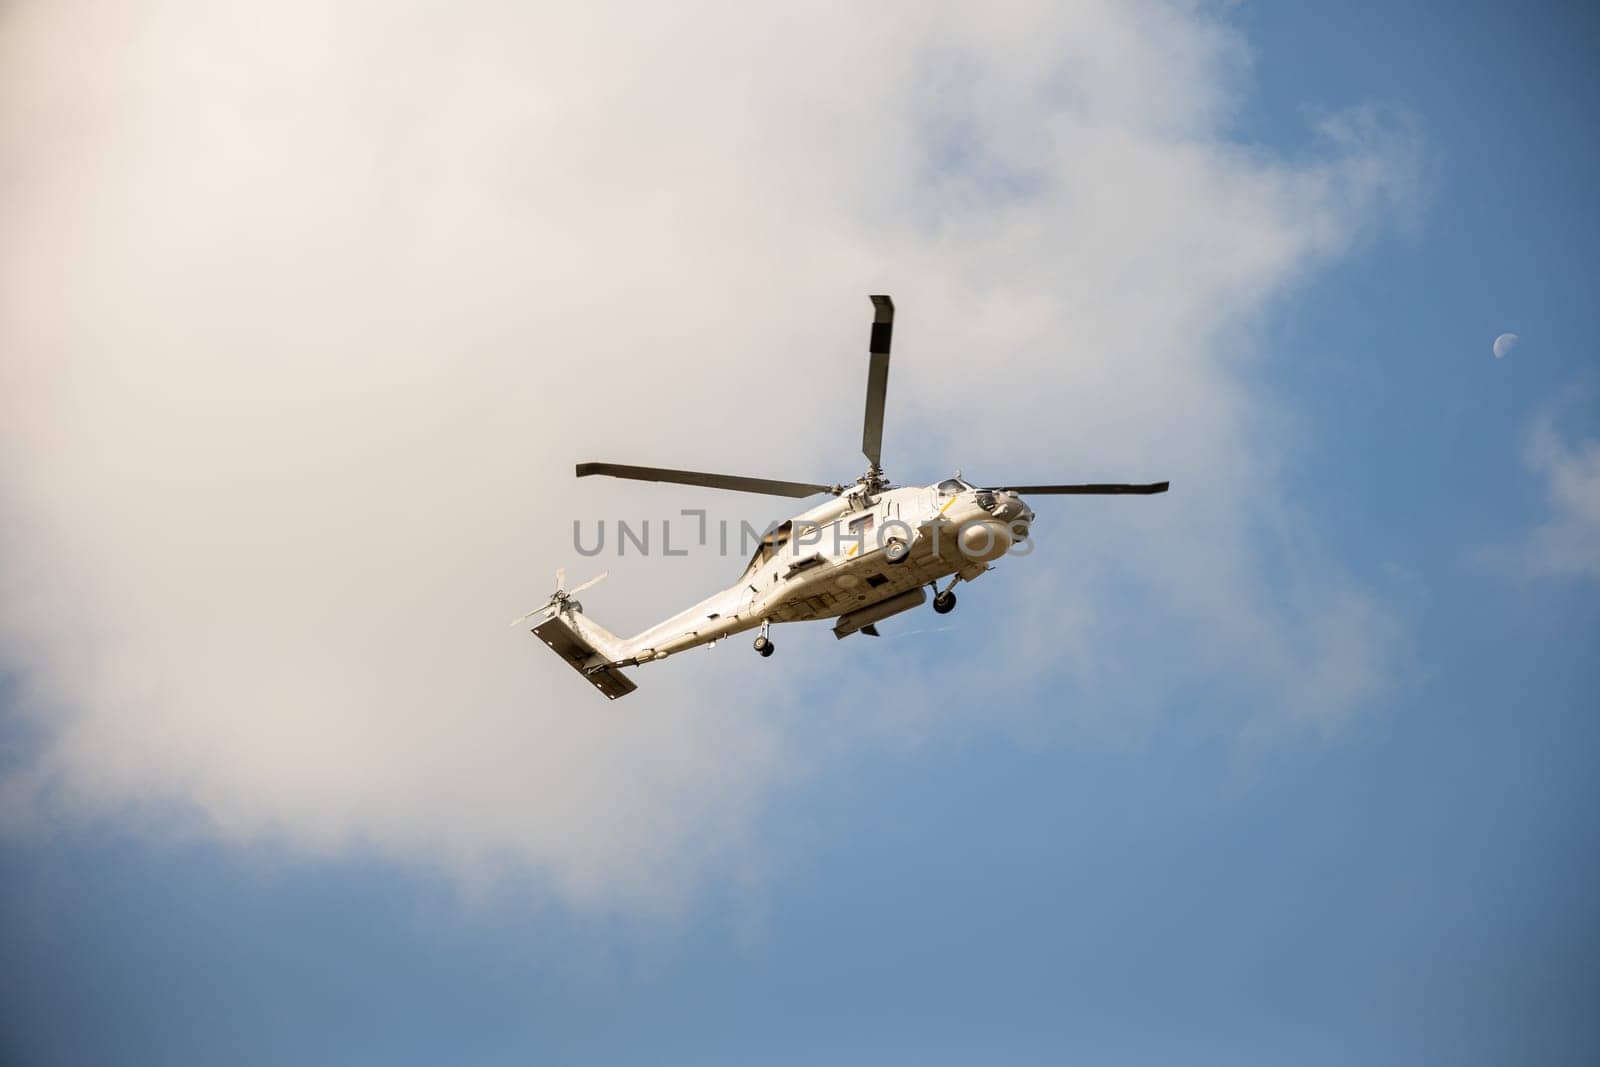 Helicopter in flight against blue sky showcasing modern rescue and transportation technology. New engine hovering capabilities. Pilot manages small aircraft's speed and angles. by Sorapop